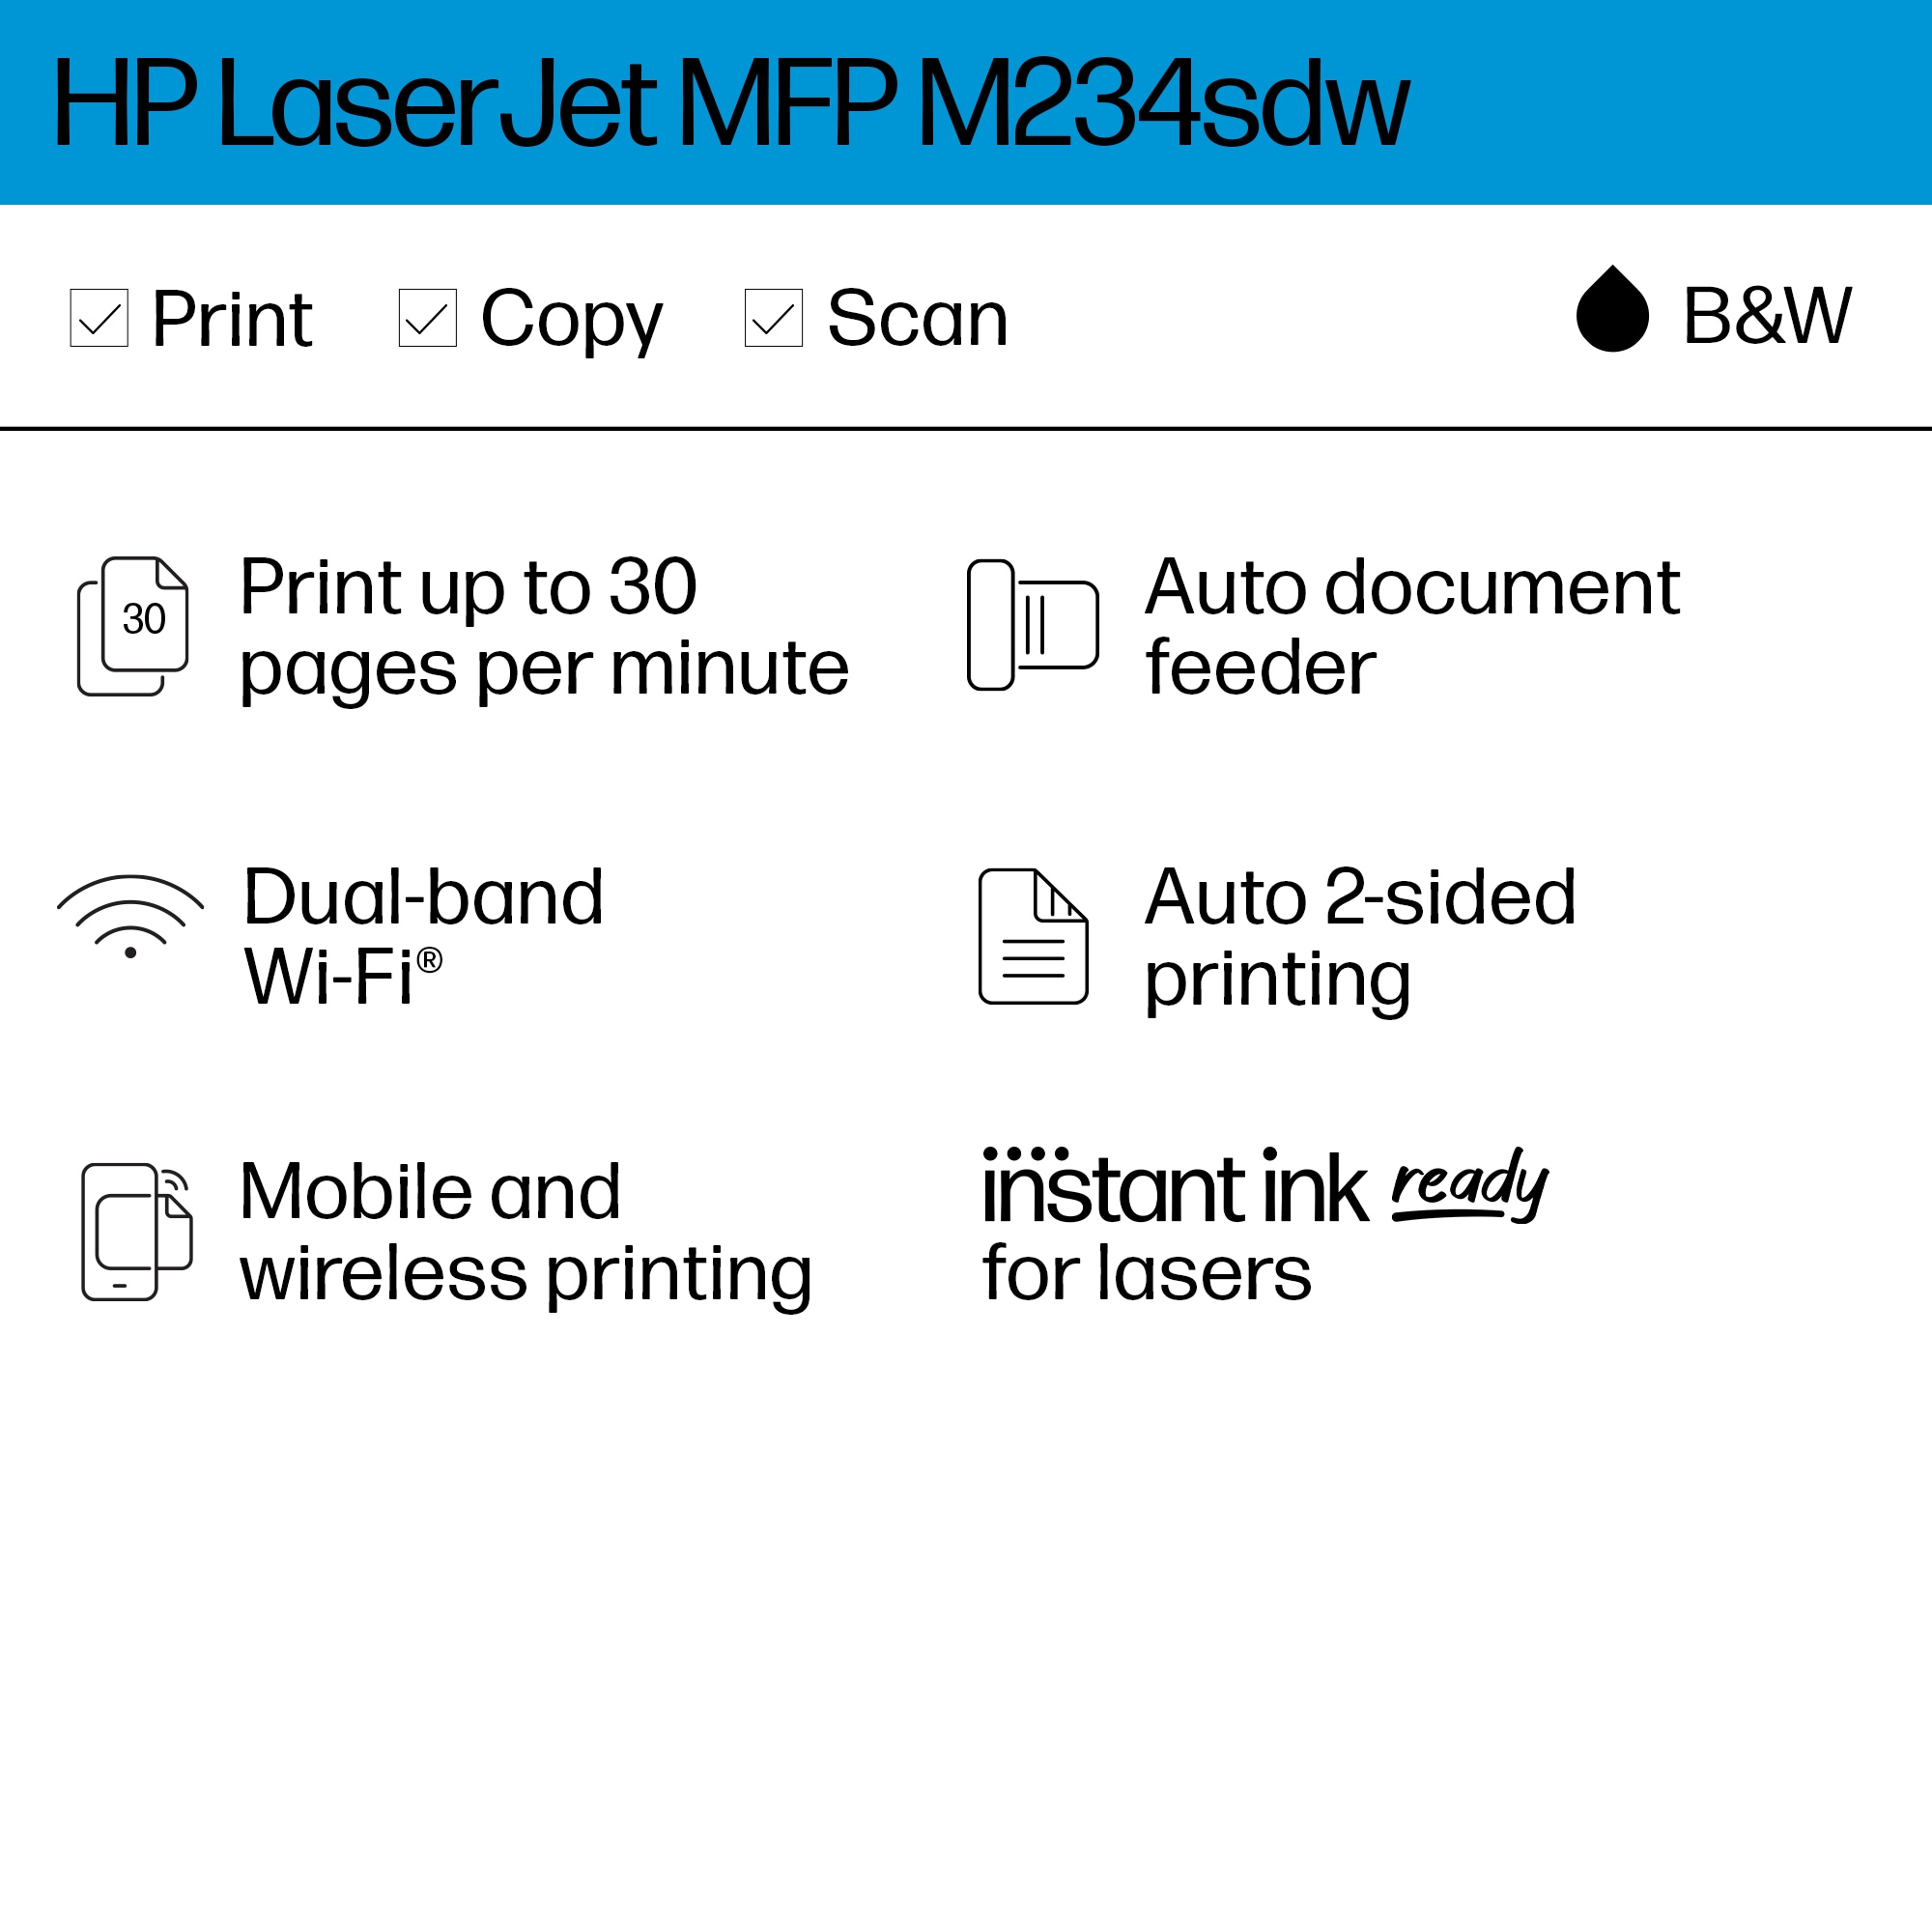 LaserJet MFP M234sdw months Instant available with Ink HP Printer 2